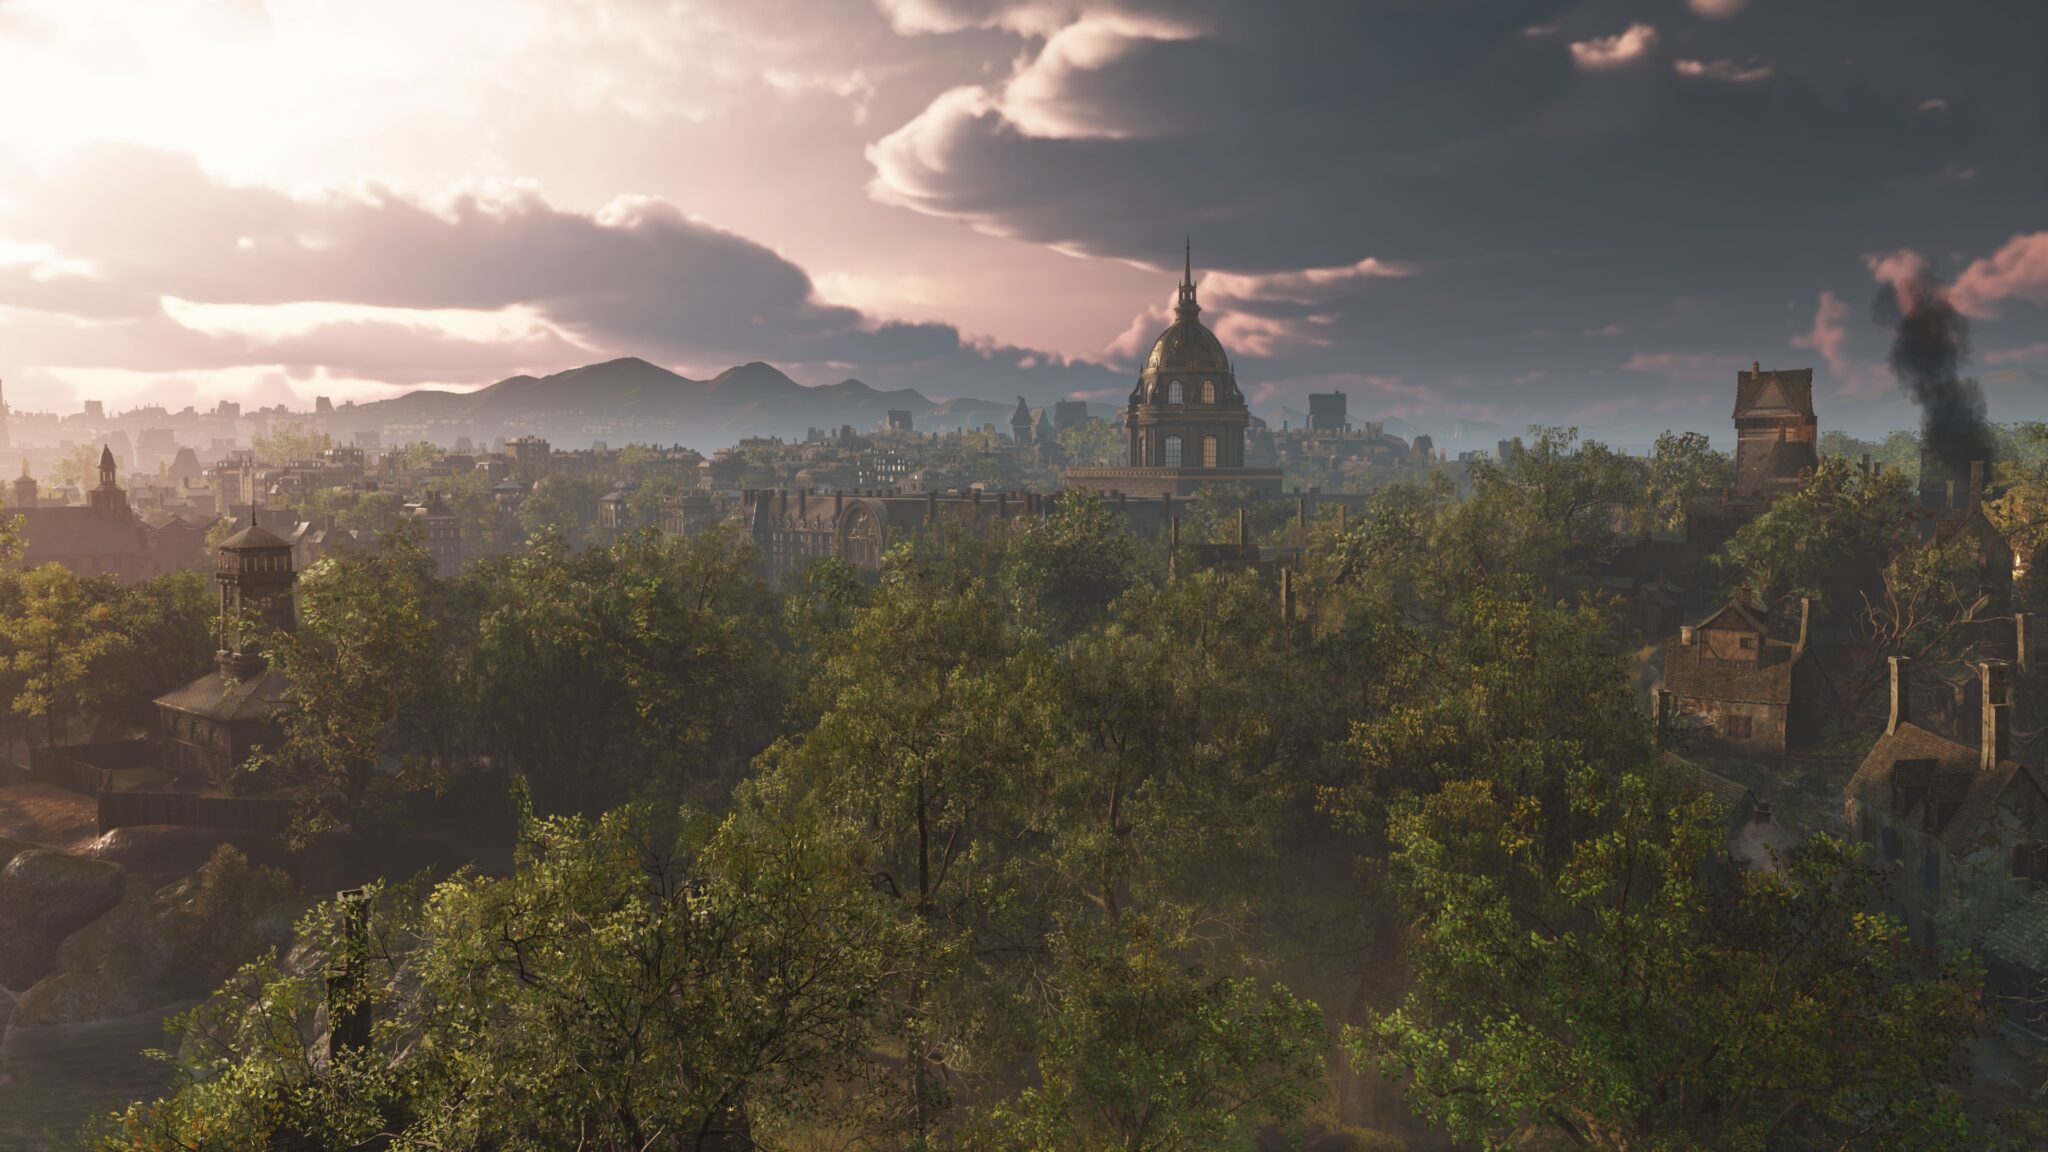 (There are some really great landscapes in the game, but our RTX 3080 gets all bent out of shape.)